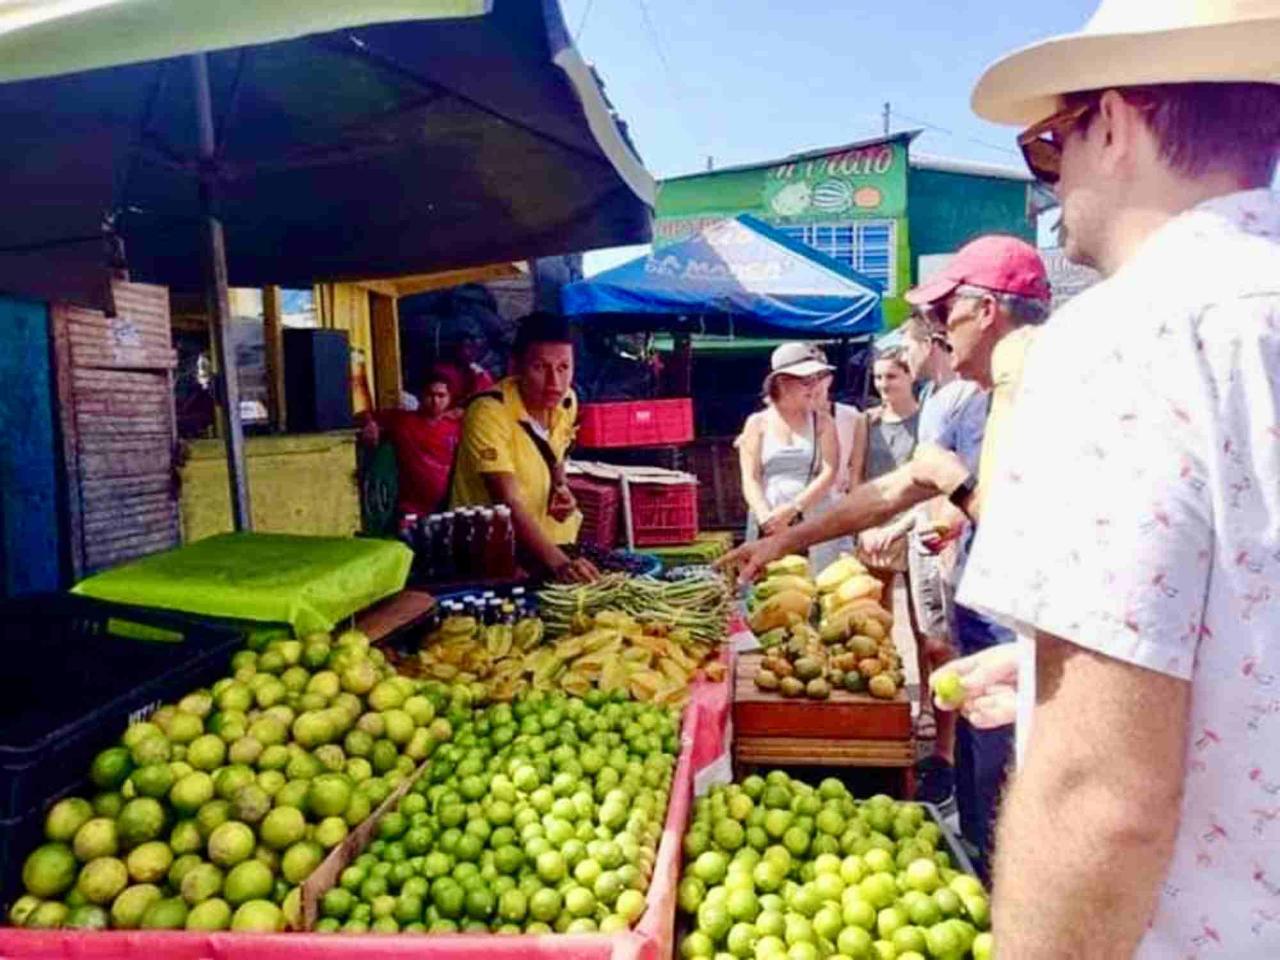 Cartagena, Bazurto Markets, Fruit tasting and Typical lunch